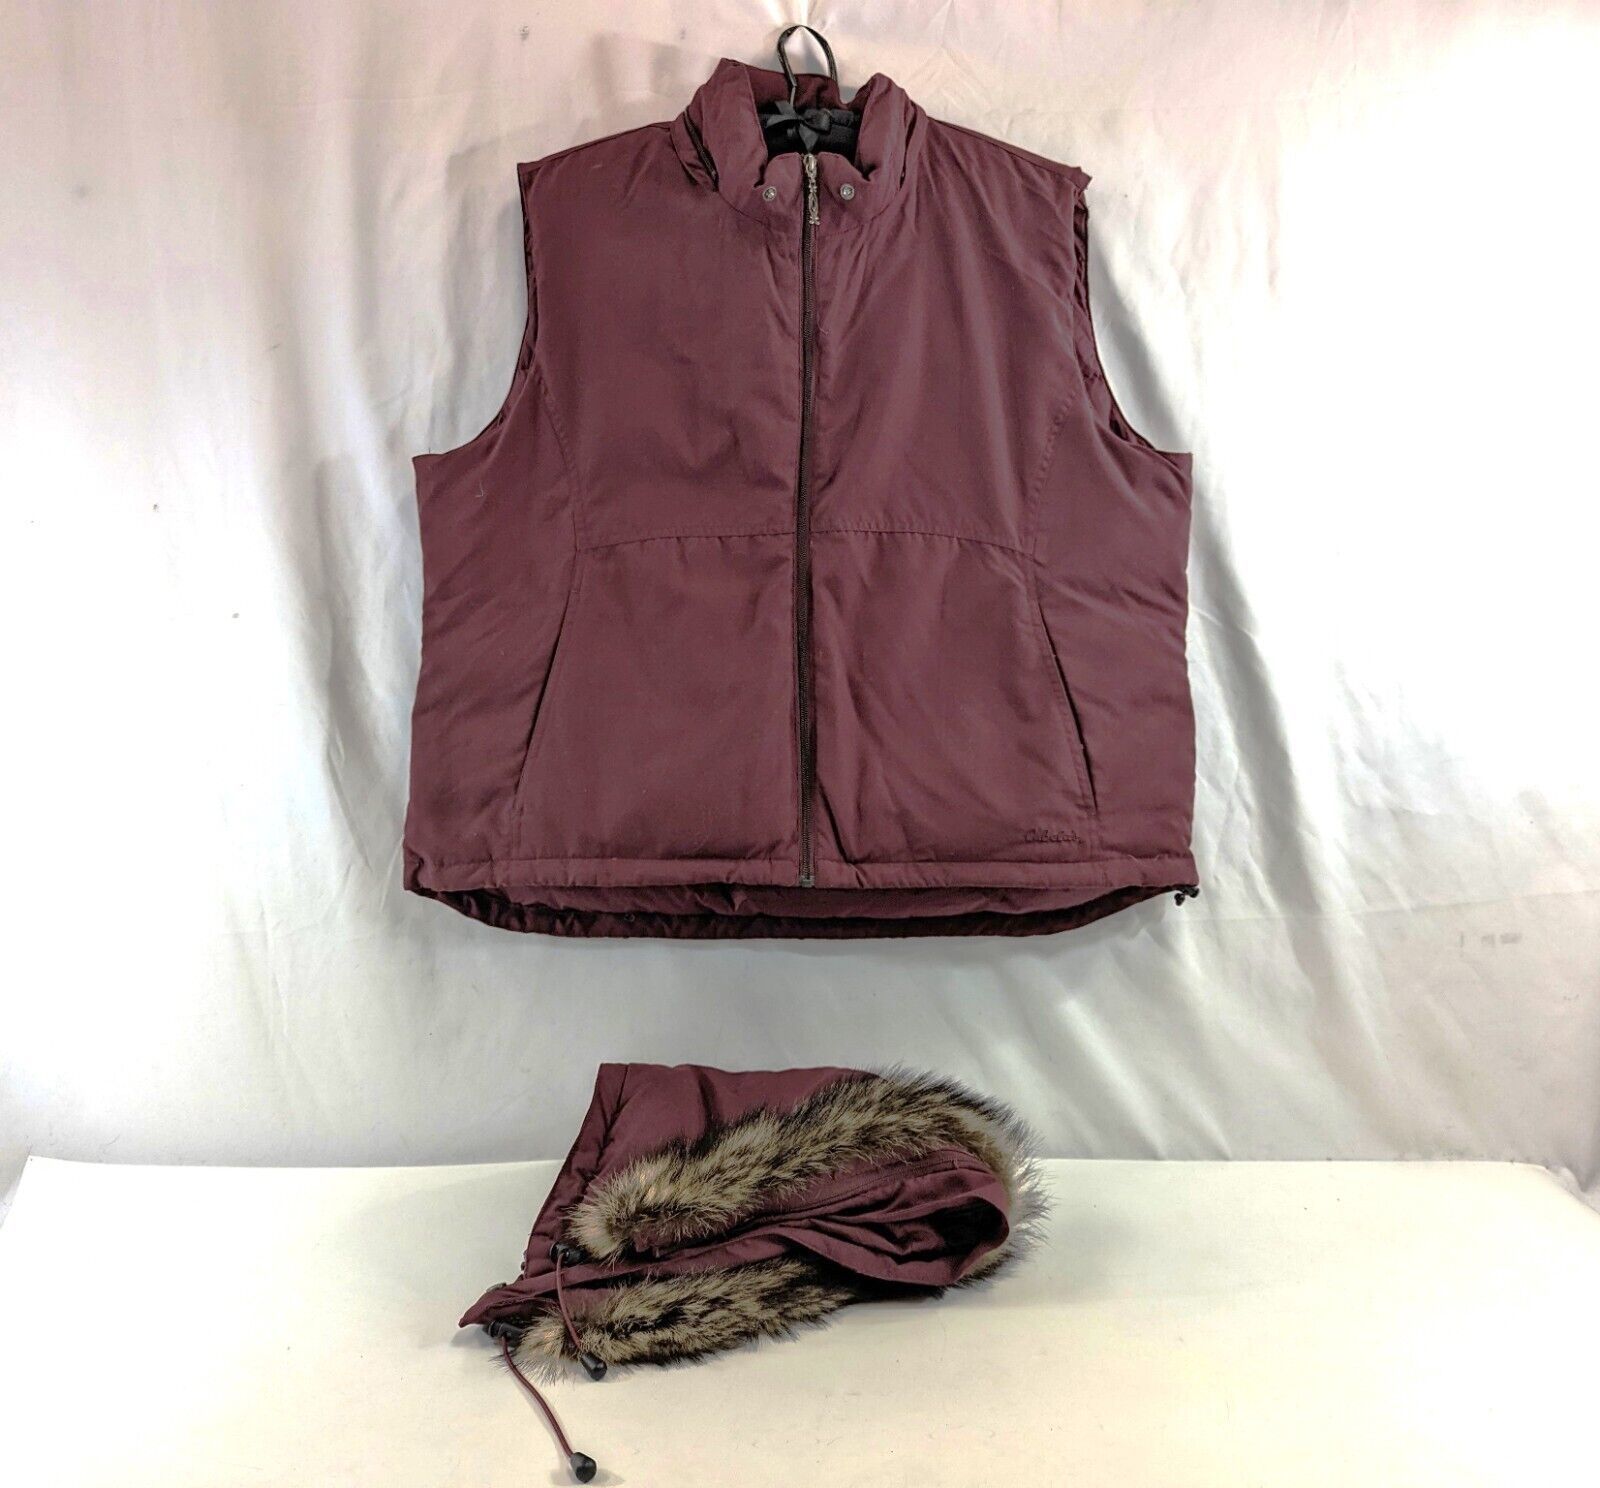 Primary image for Cabela's Goose Down Fur Hooded Puffer Vest Burgundy Womens Size 2XL Zip